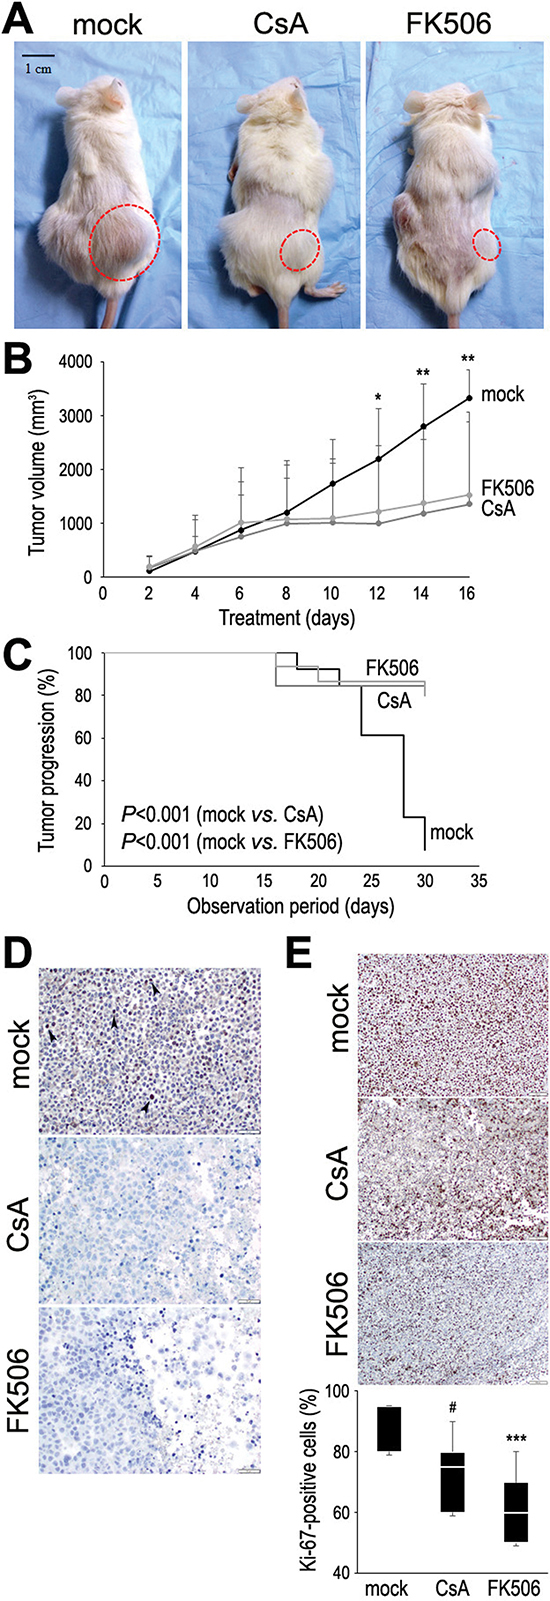 Effects of CsA and FK506 on tumor growth in a mouse xenograft model for bladder cancer.